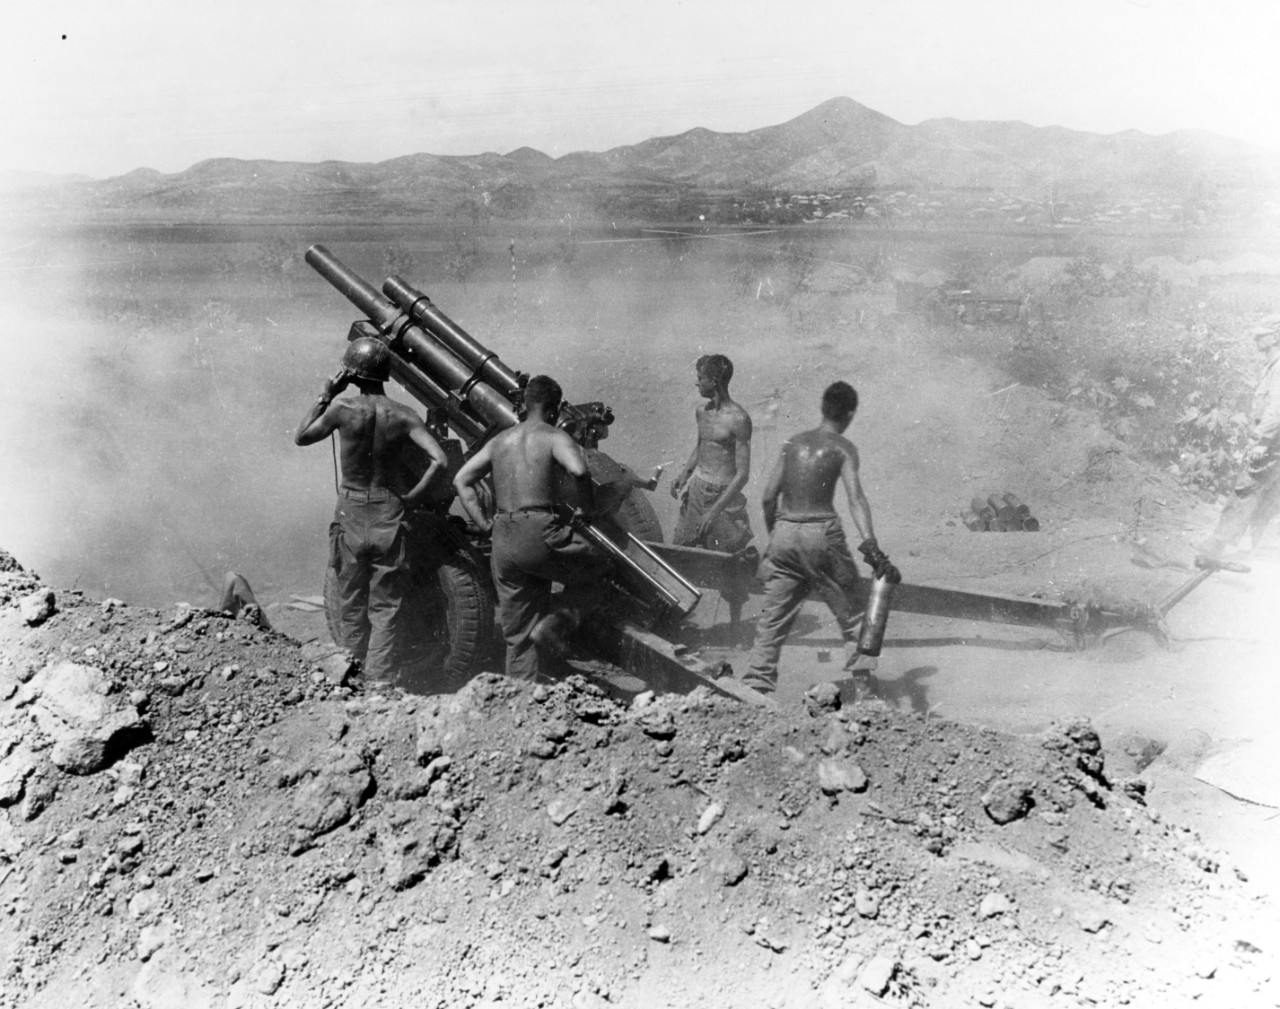 Gun crew of the 64th Field Artillery Battalion, 25th Infantry Division, fire a 105mm howitzer on North Korean positions near Uirson, South Korea, 27 August 1950. Photographed by PFC Wayne H. Weidner. Photograph from the Army Signal Corps Collecti...